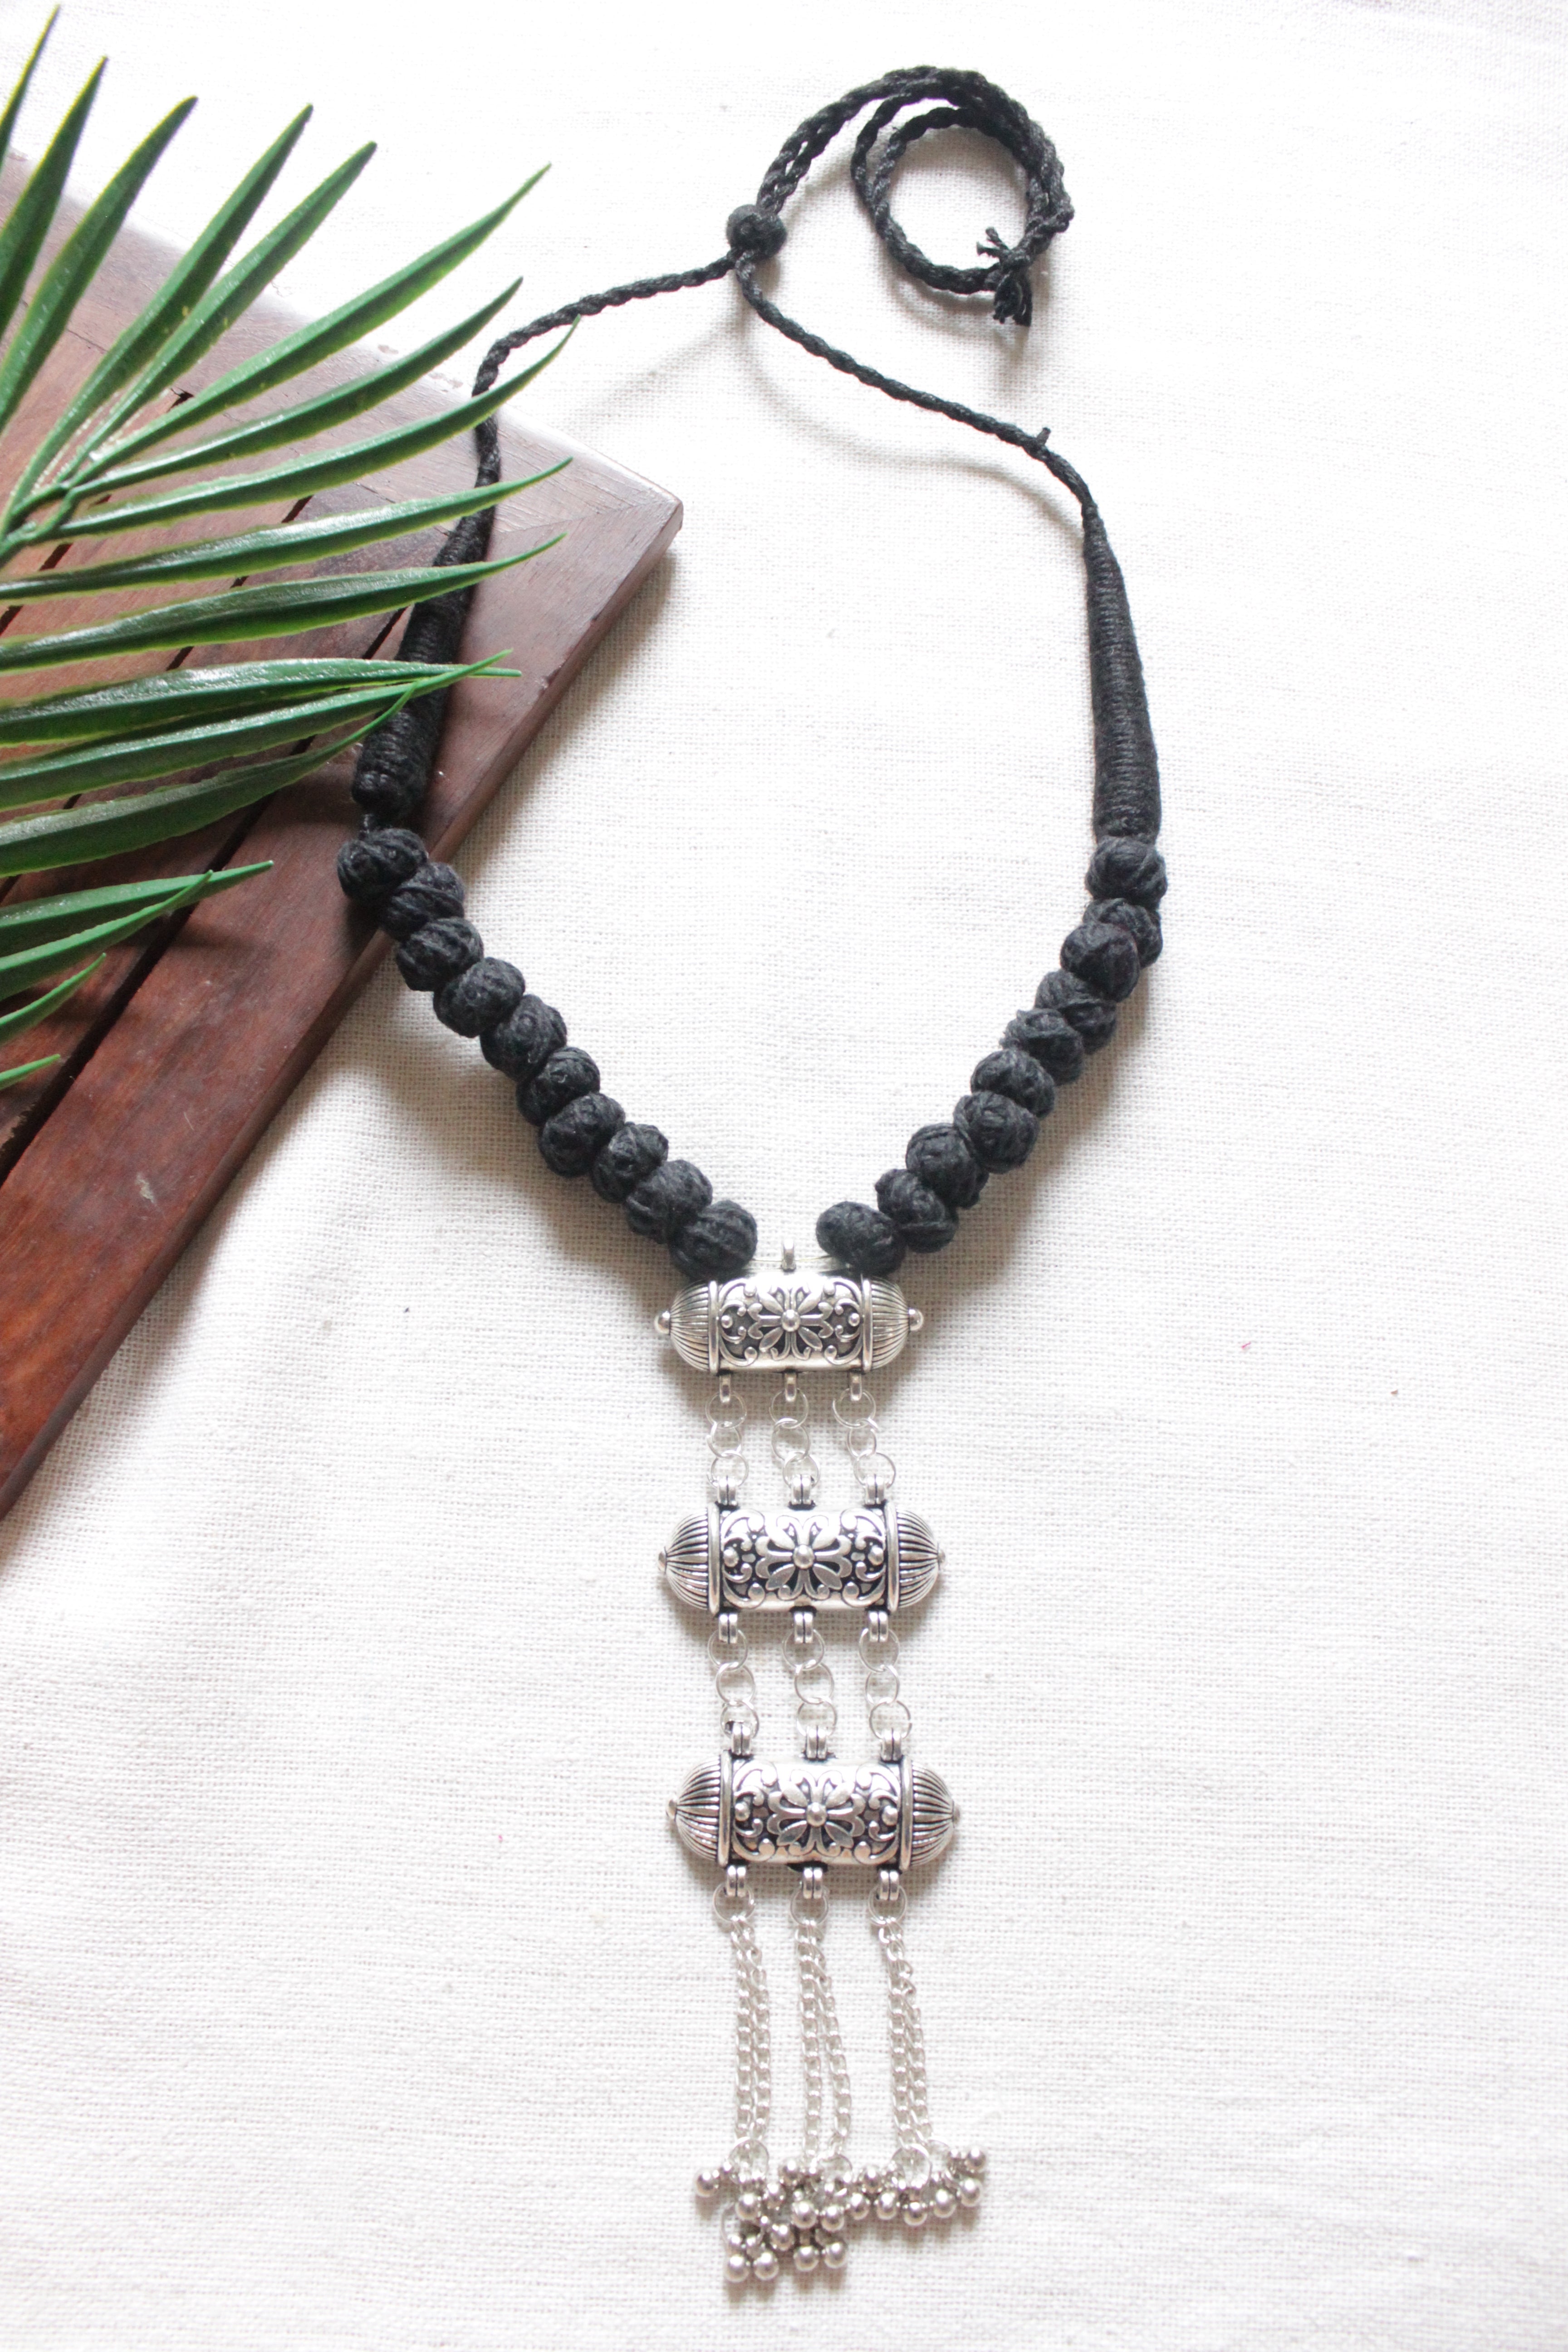 Fabric Threads and Multi Layer Metal Pendant Black Oxidised Choker Necklace with Adjustable Length